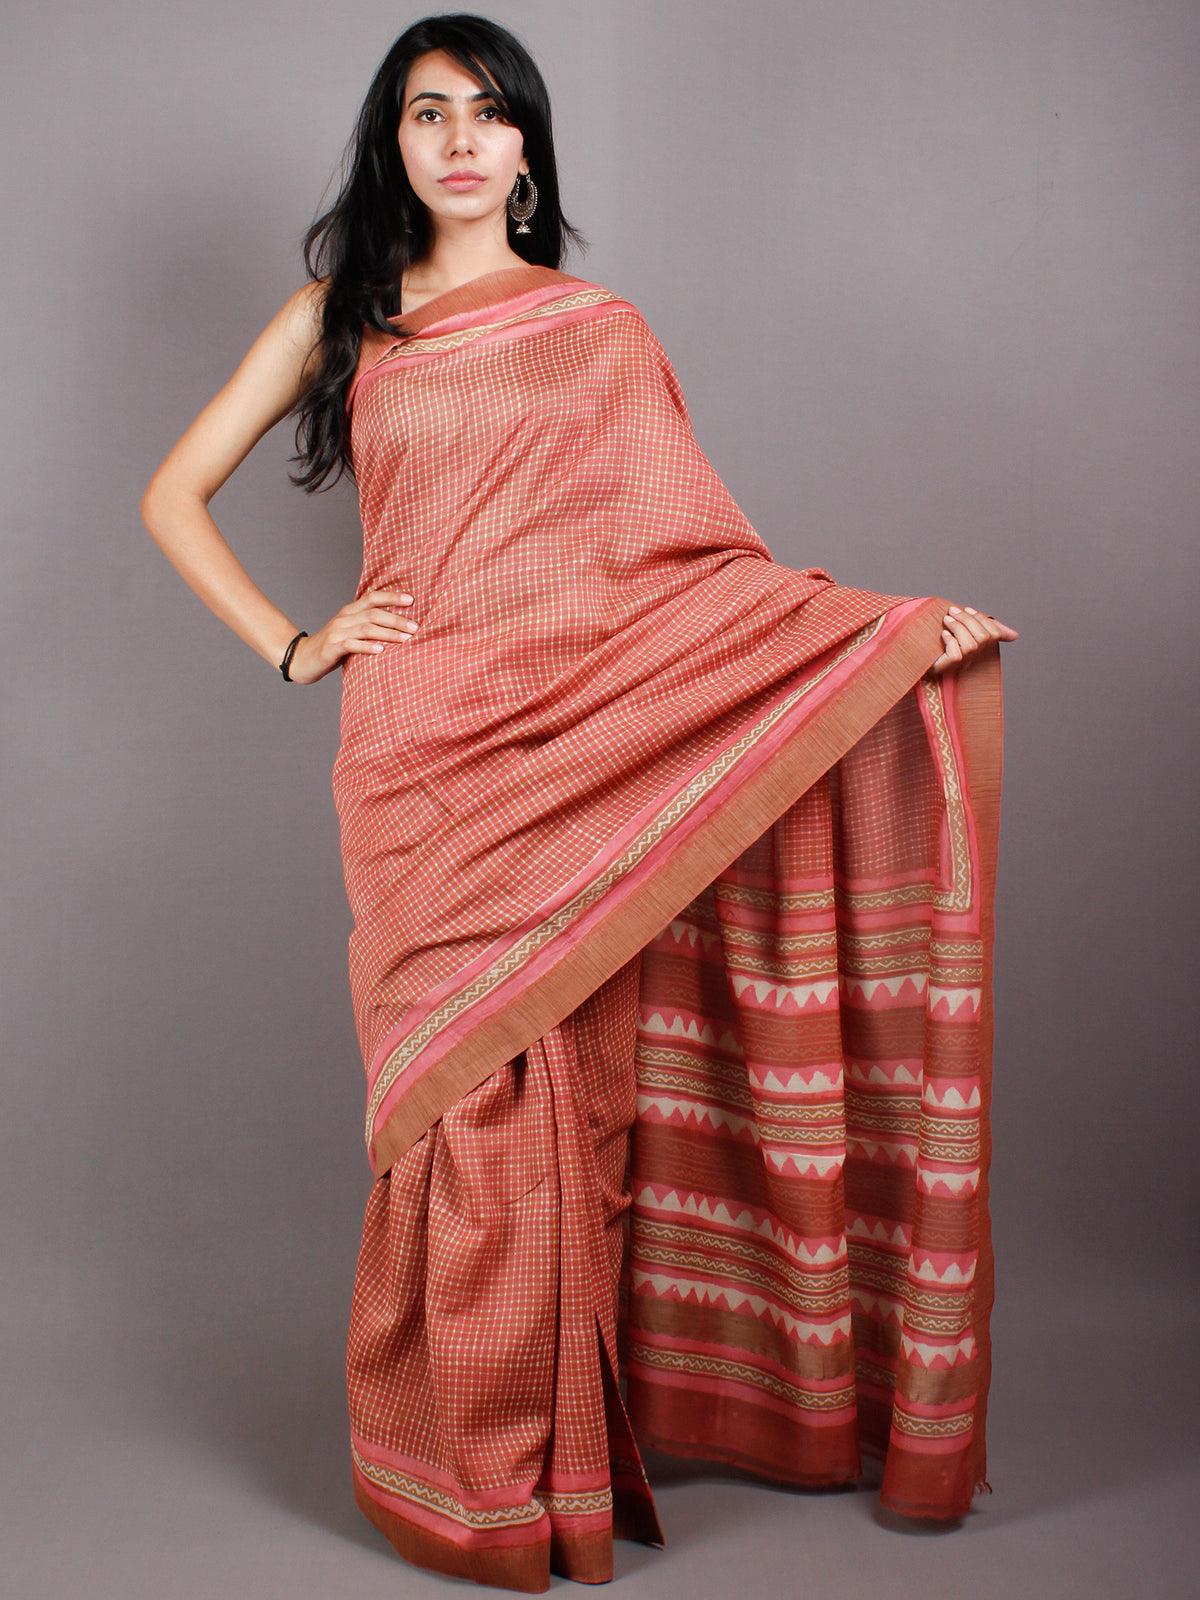 Pastel Peach Beige Hand Block Printed in Natural Vegetable Colors Chanderi Saree With Geecha Border - S03170494